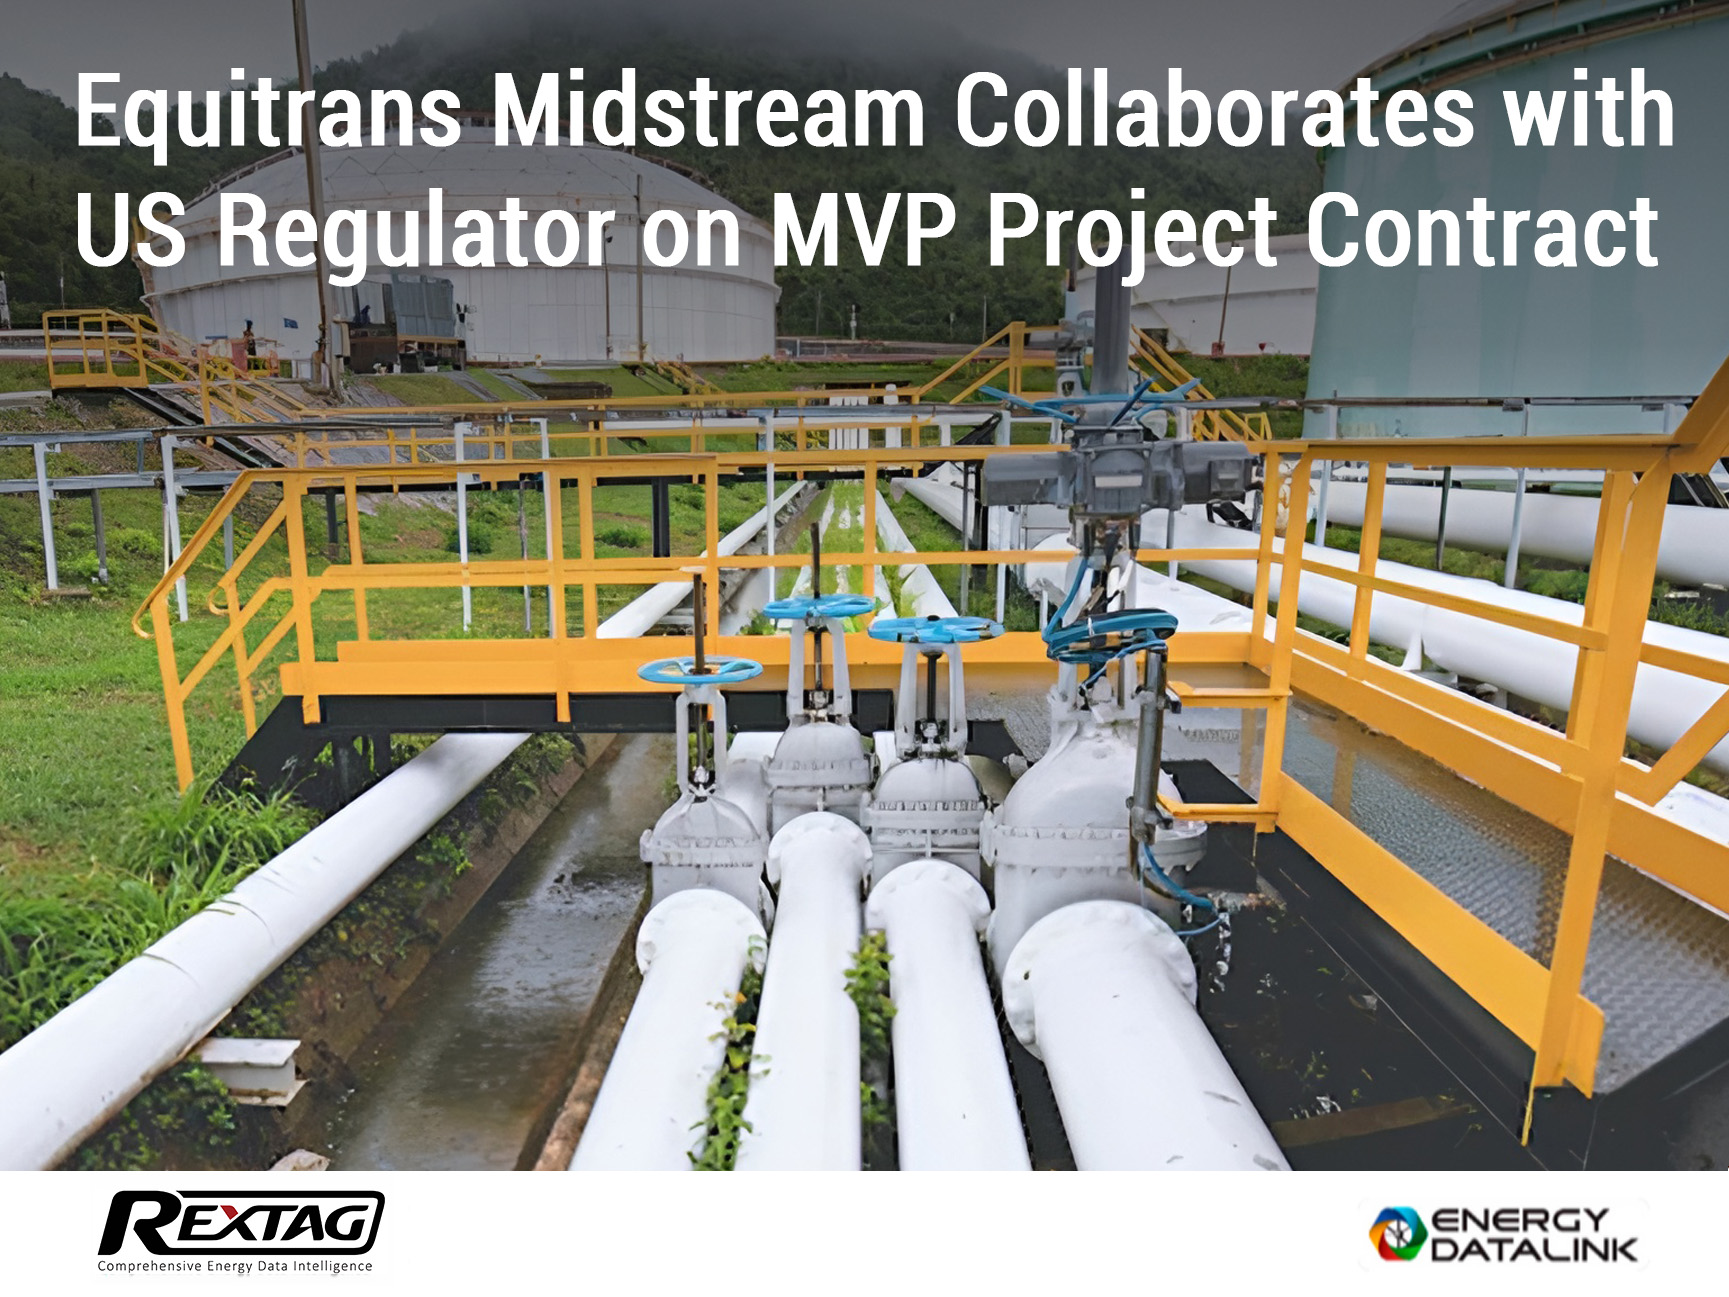 Equitrans-Midstream-Collaborates-with-US-Regulator-on-MVP-Project-Contract